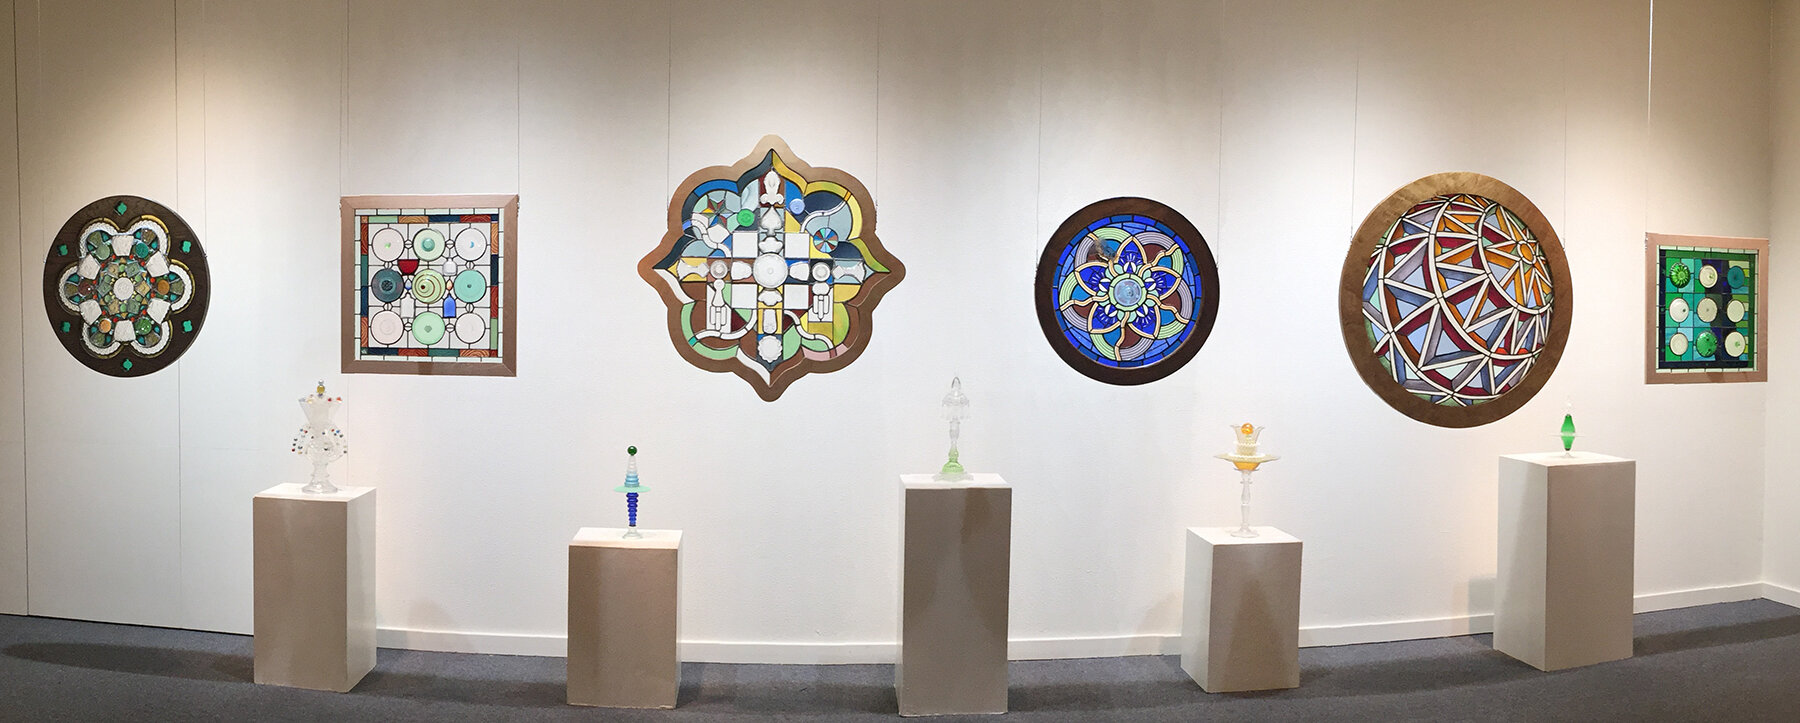 Exhibit of Stained Glass 2019